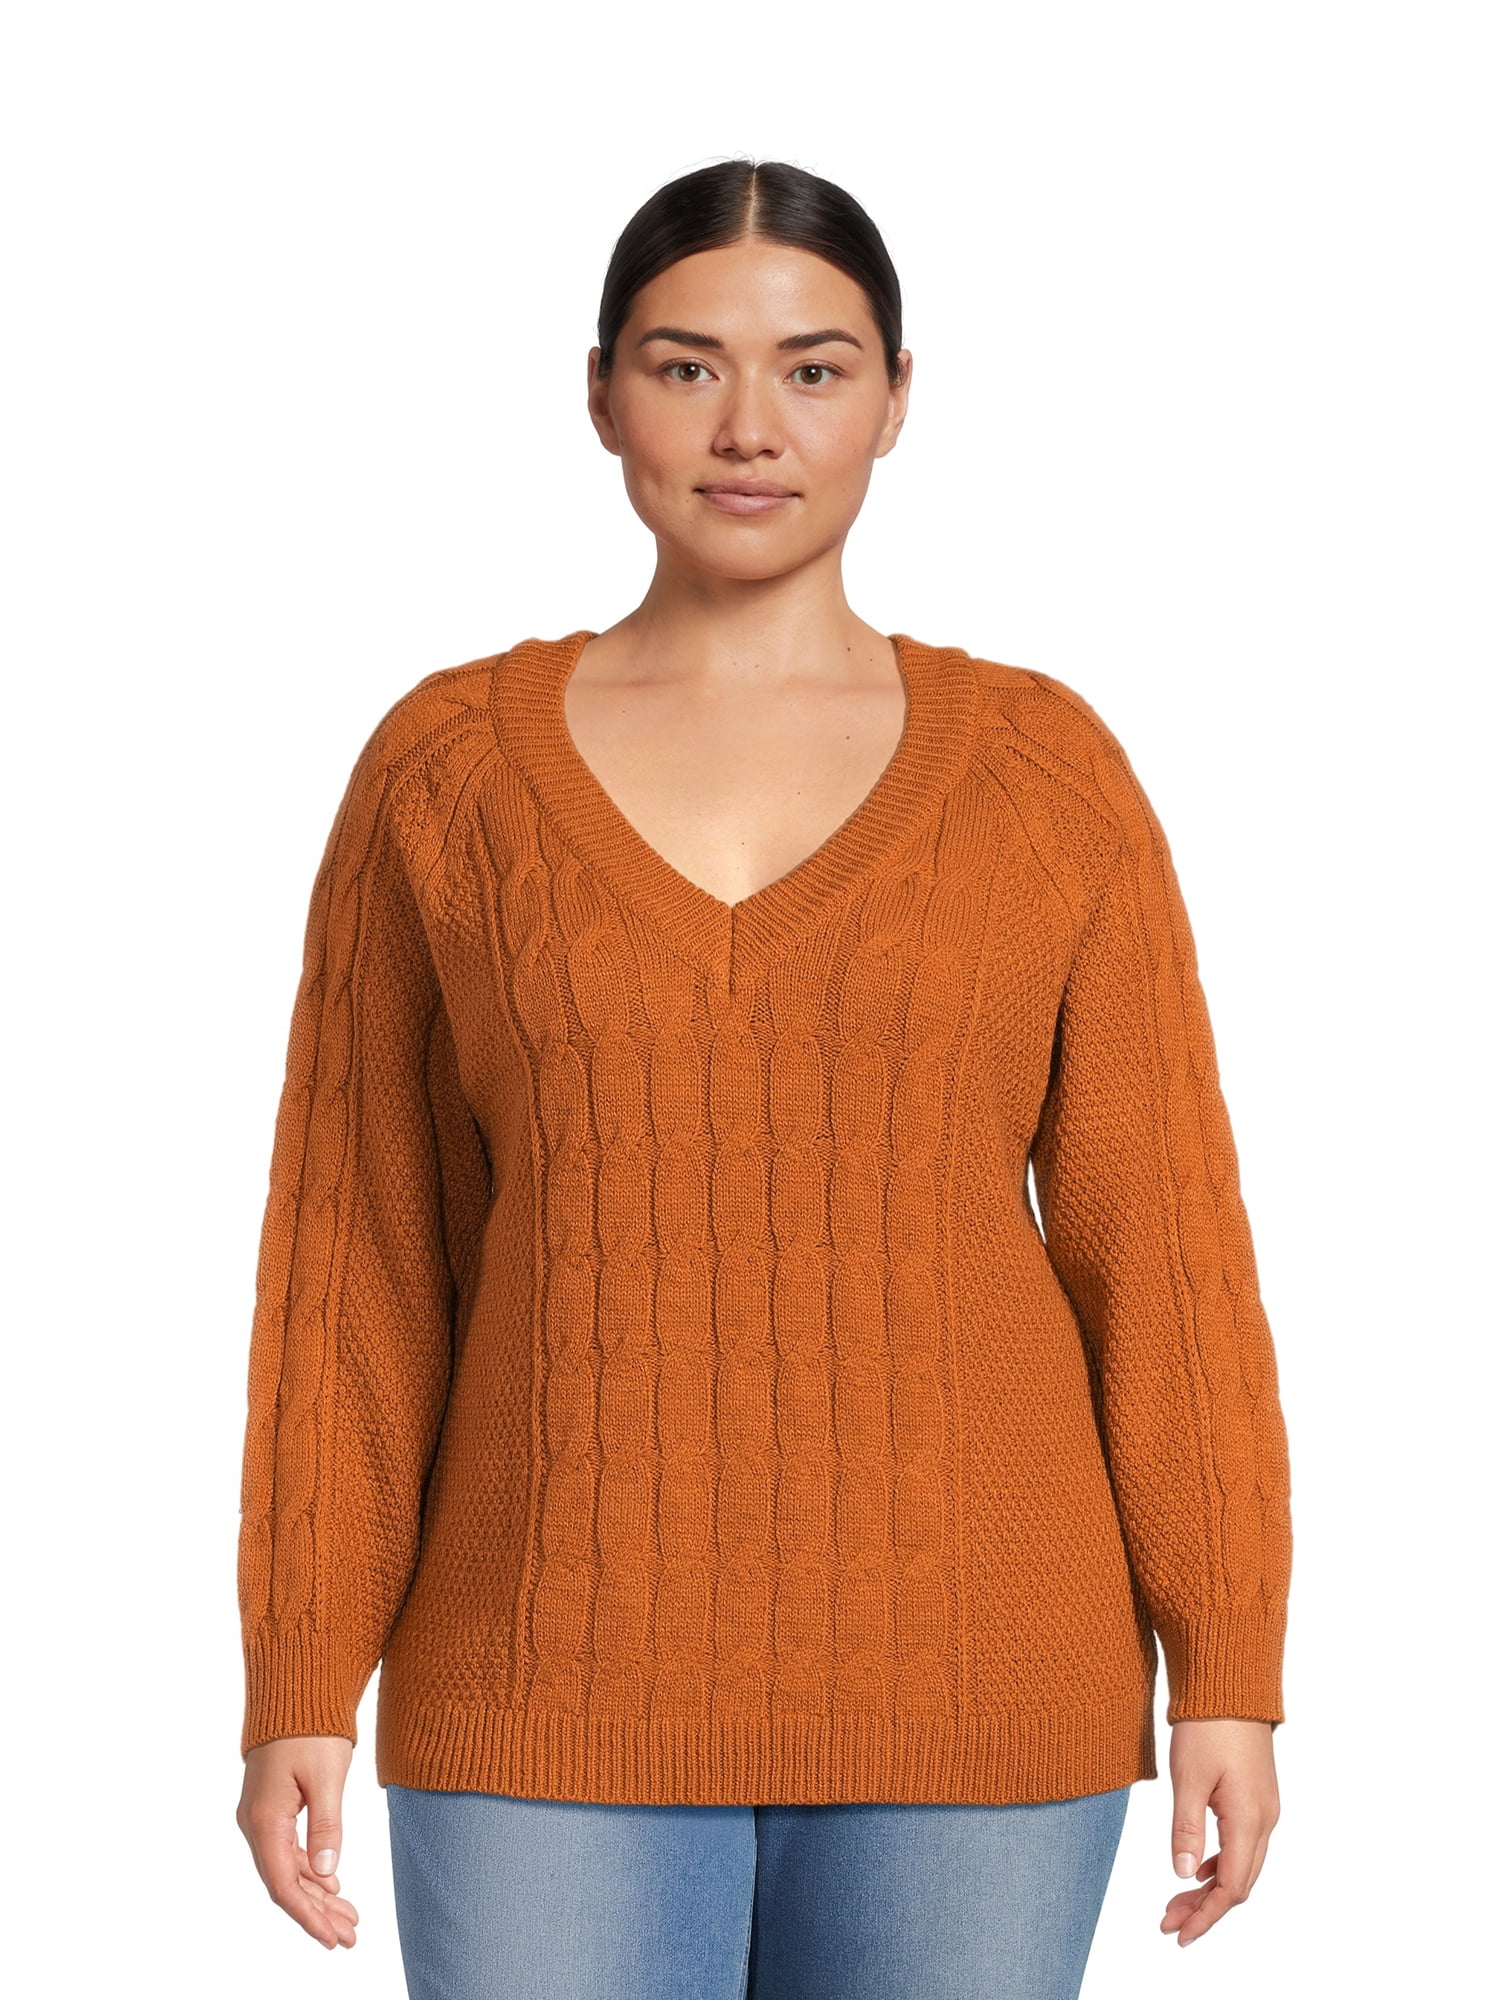 Terra And Sky Women S Plus Size Cable Knit Pullover Sweater Midweight